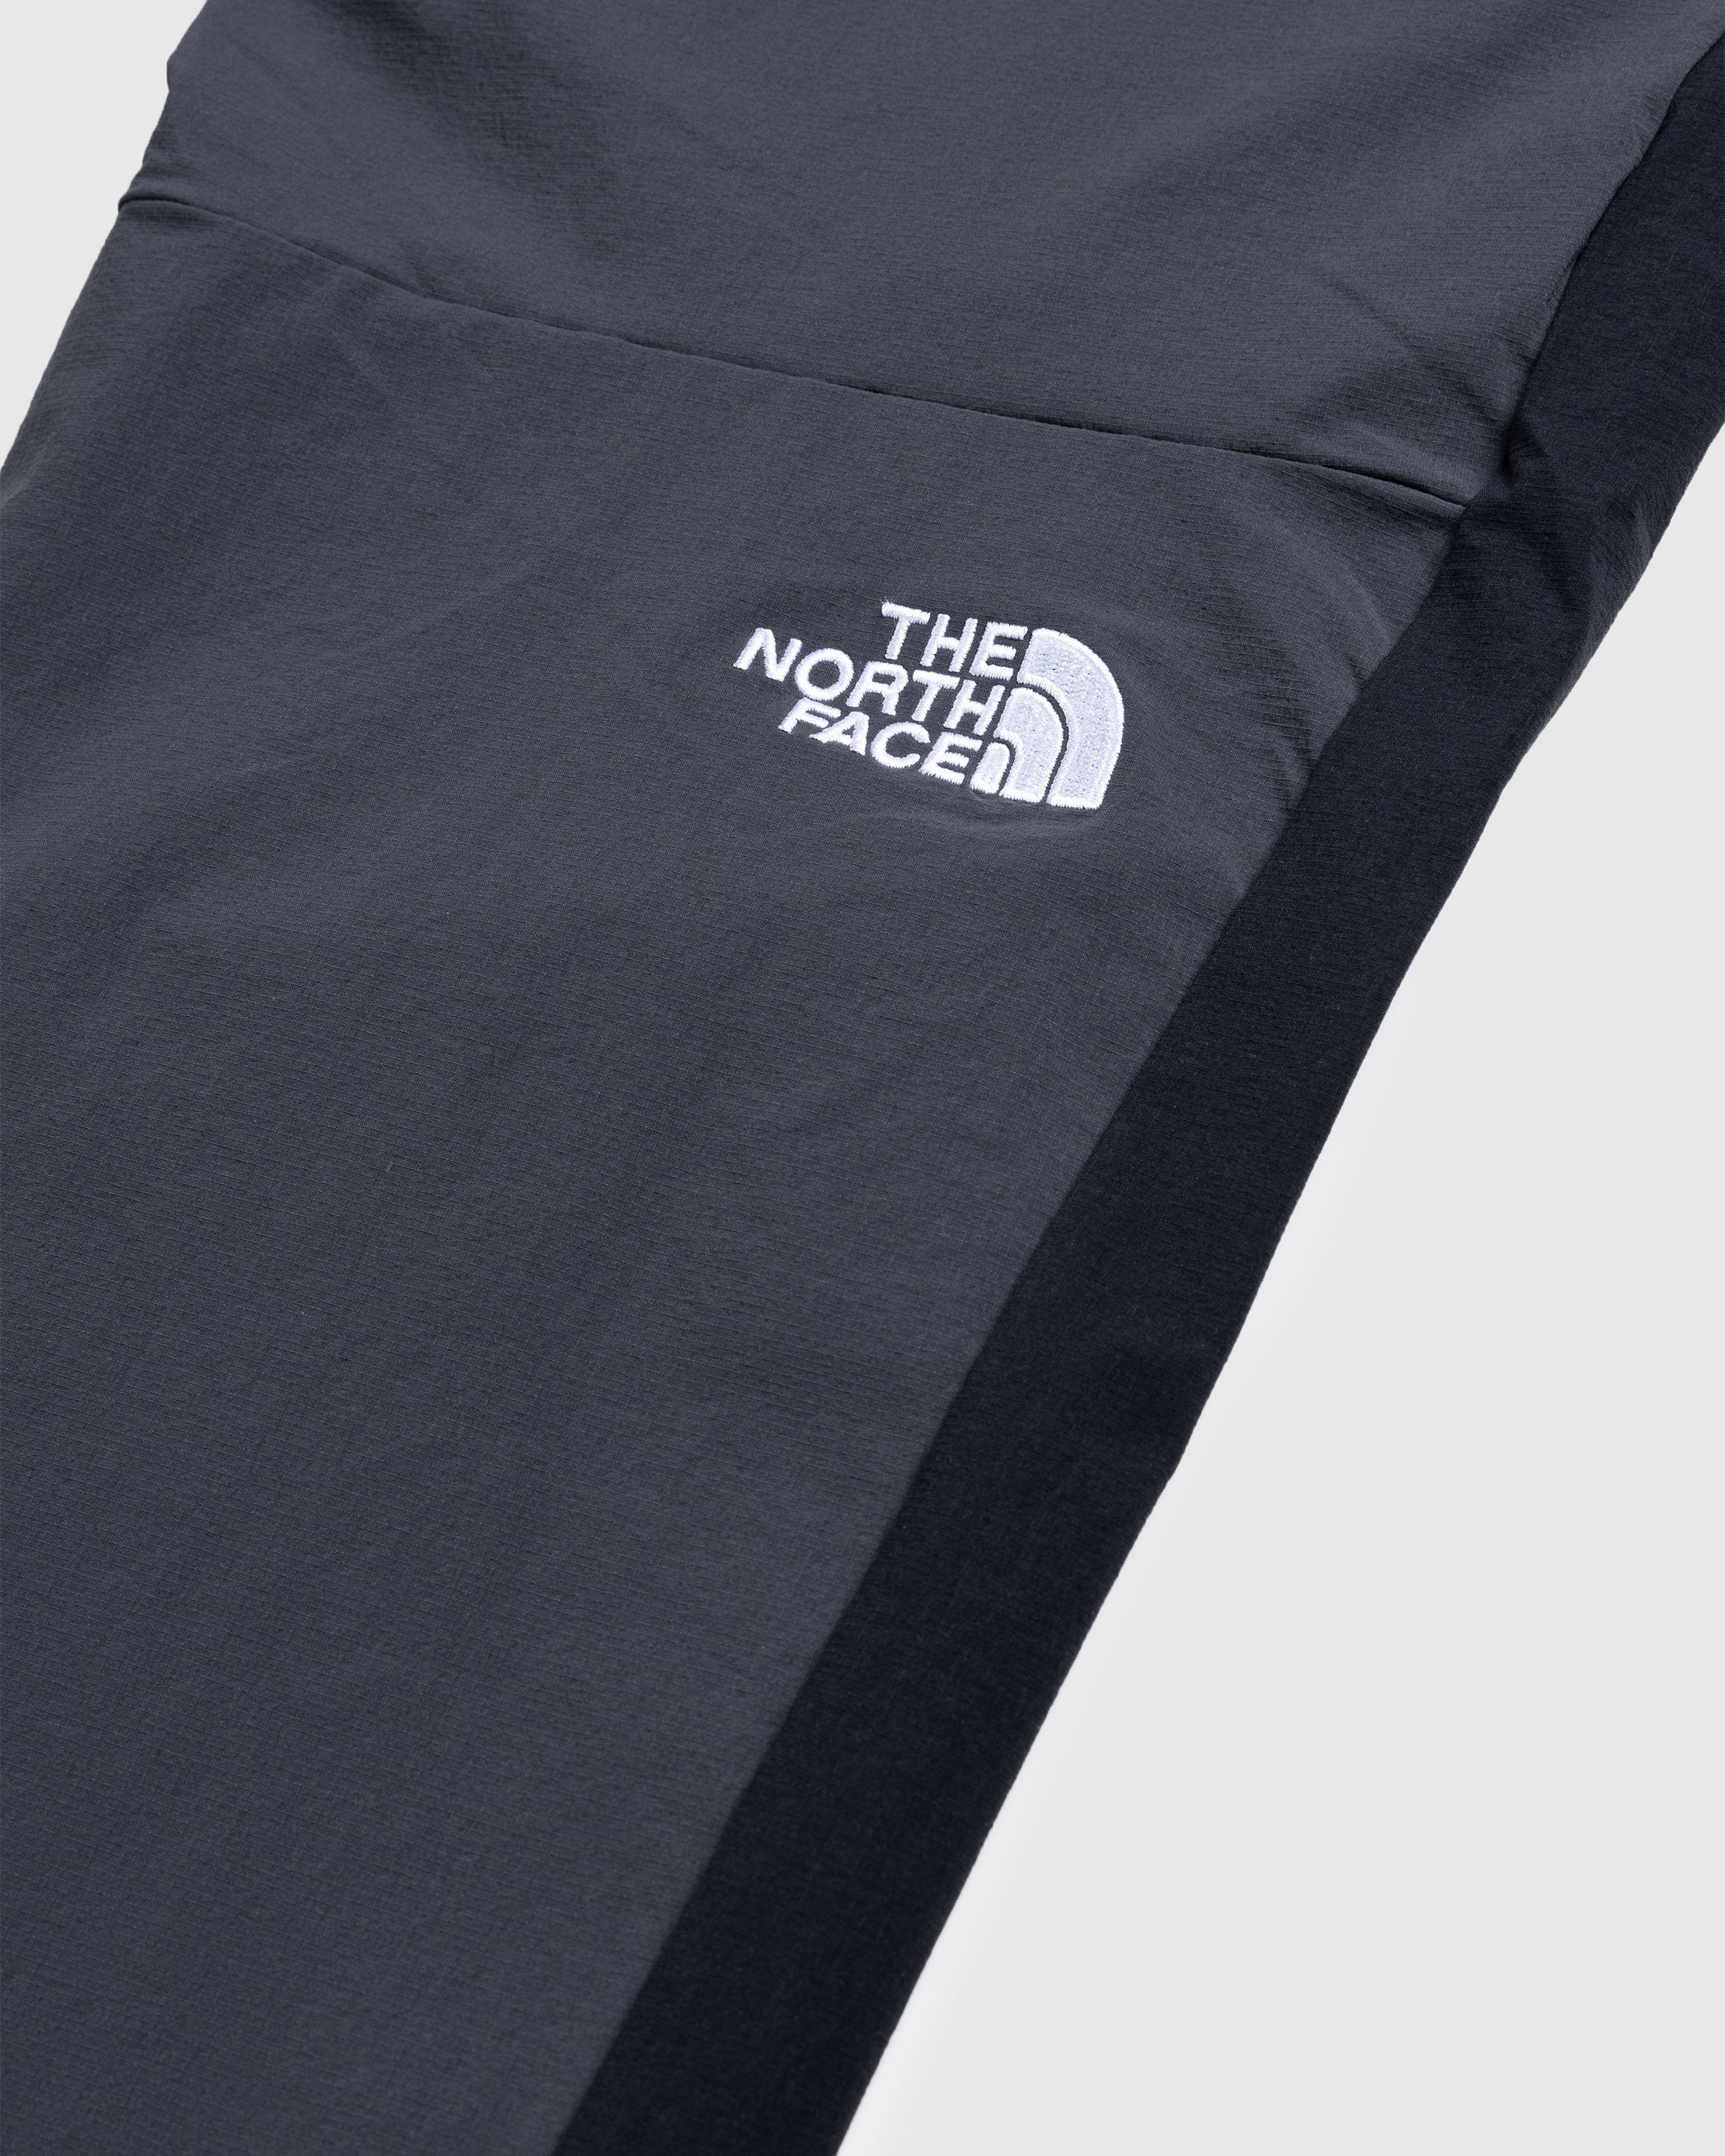 The North Face - NSE Shell Suit Pant Asphalt Grey/TNF Black - Clothing - Grey - Image 6